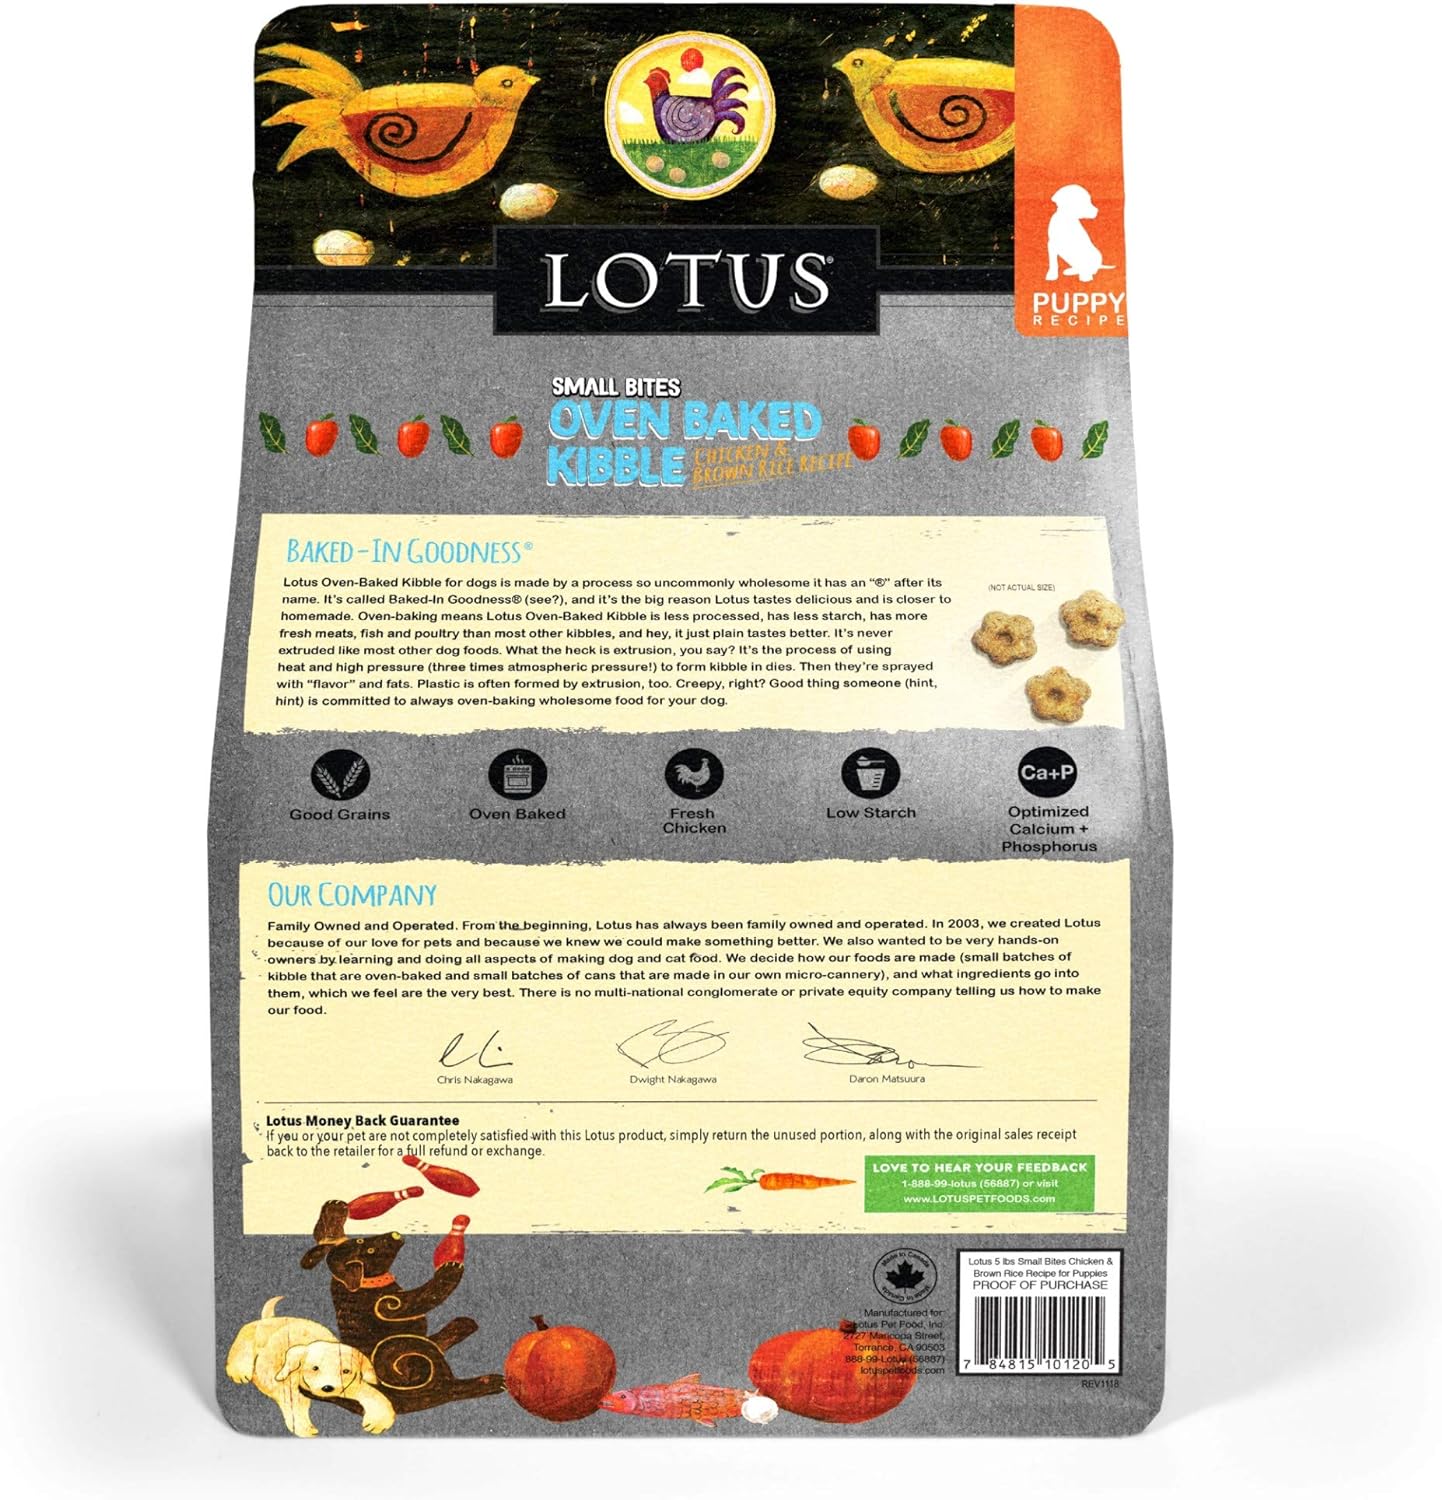 Lotus Oven Baked Small Bites Chicken Recipe Puppy Dry Dog Food – Gallery Image 2